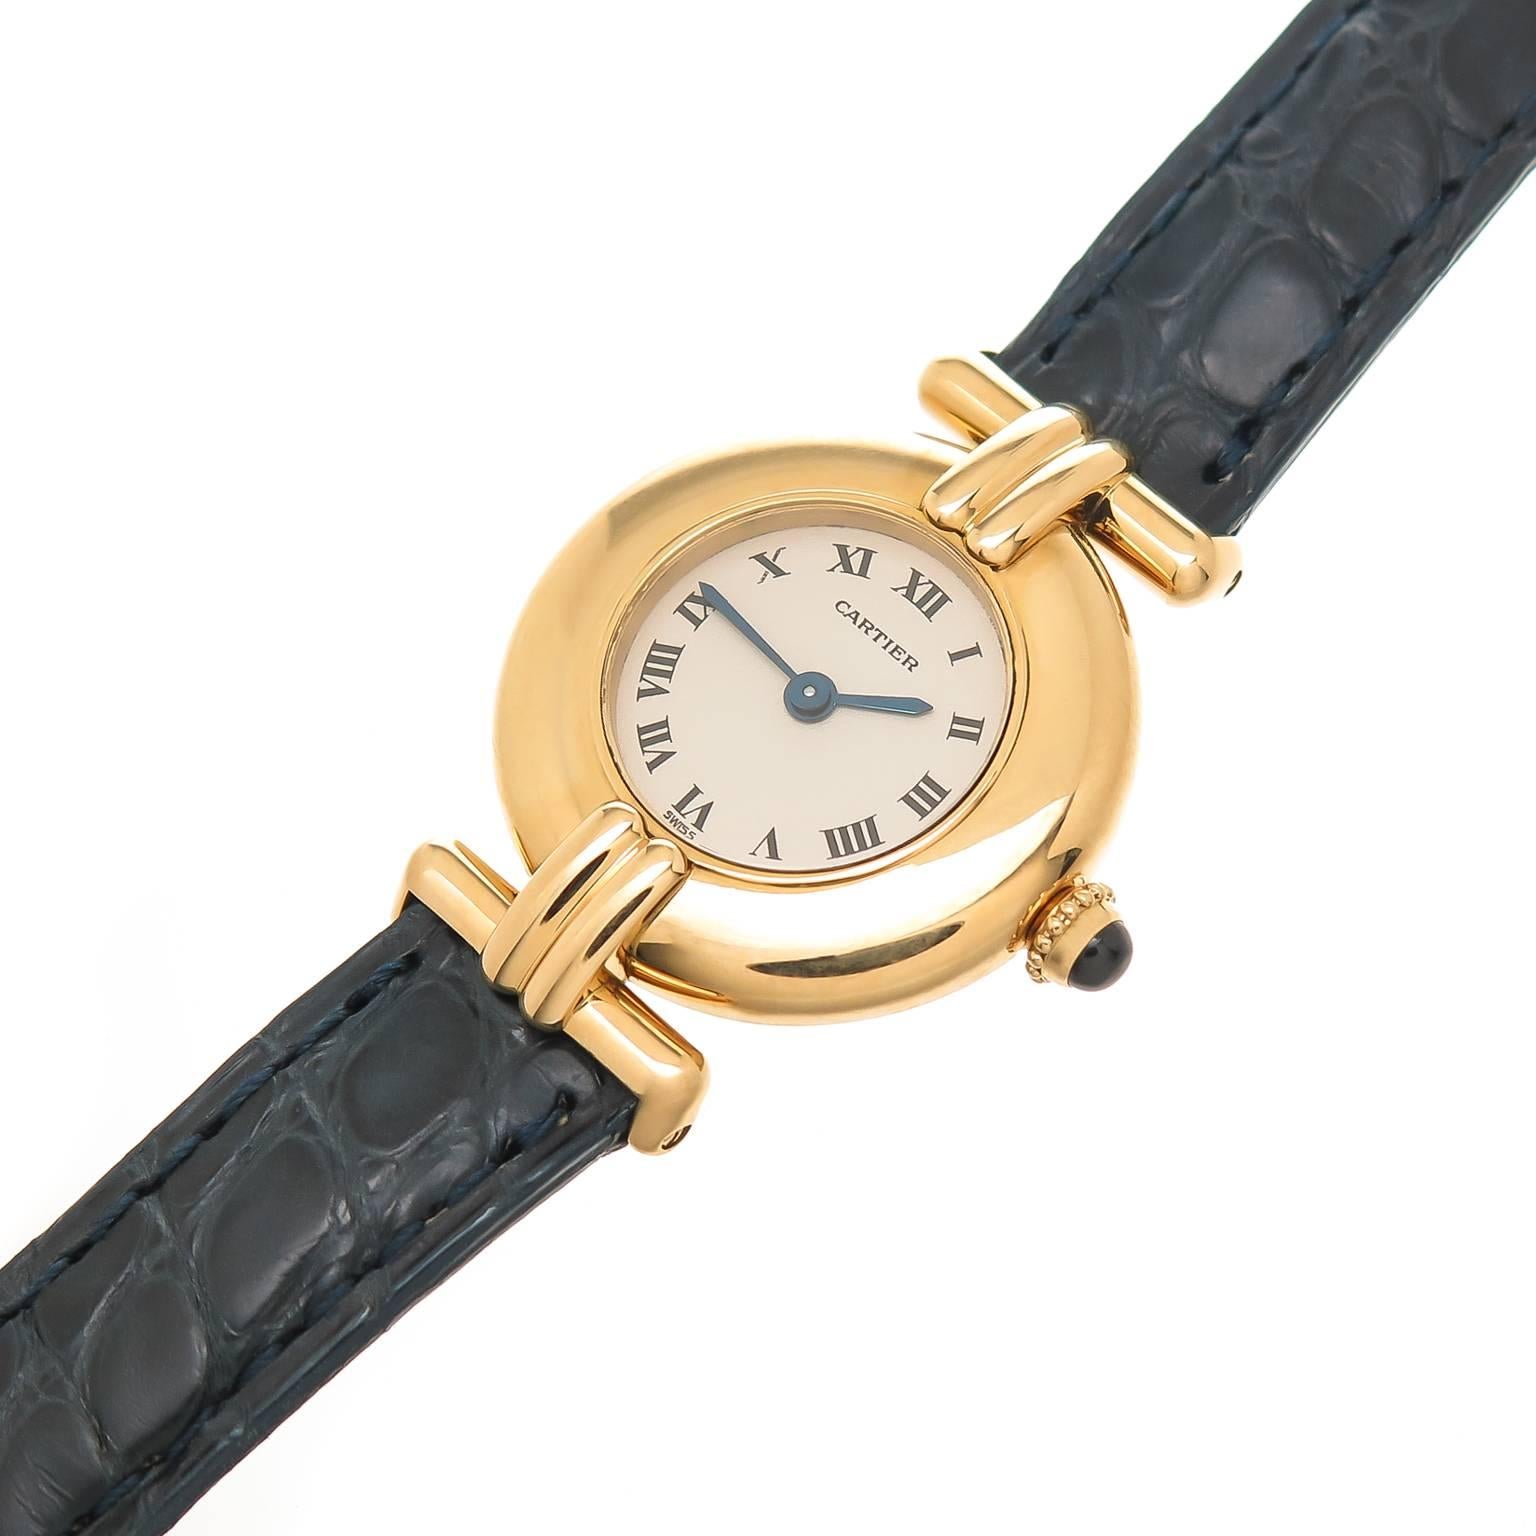 Circa 1990s Cartier Colisee collection Ladies Wrist watch, 24 MM water resistant case. Quartz Movement, White Dial with Black Roman numerals, sapphire crown. New, Cartier Navy Blue Textured Strap with Cartier 18K Yellow Gold Tang buckle. Comes in